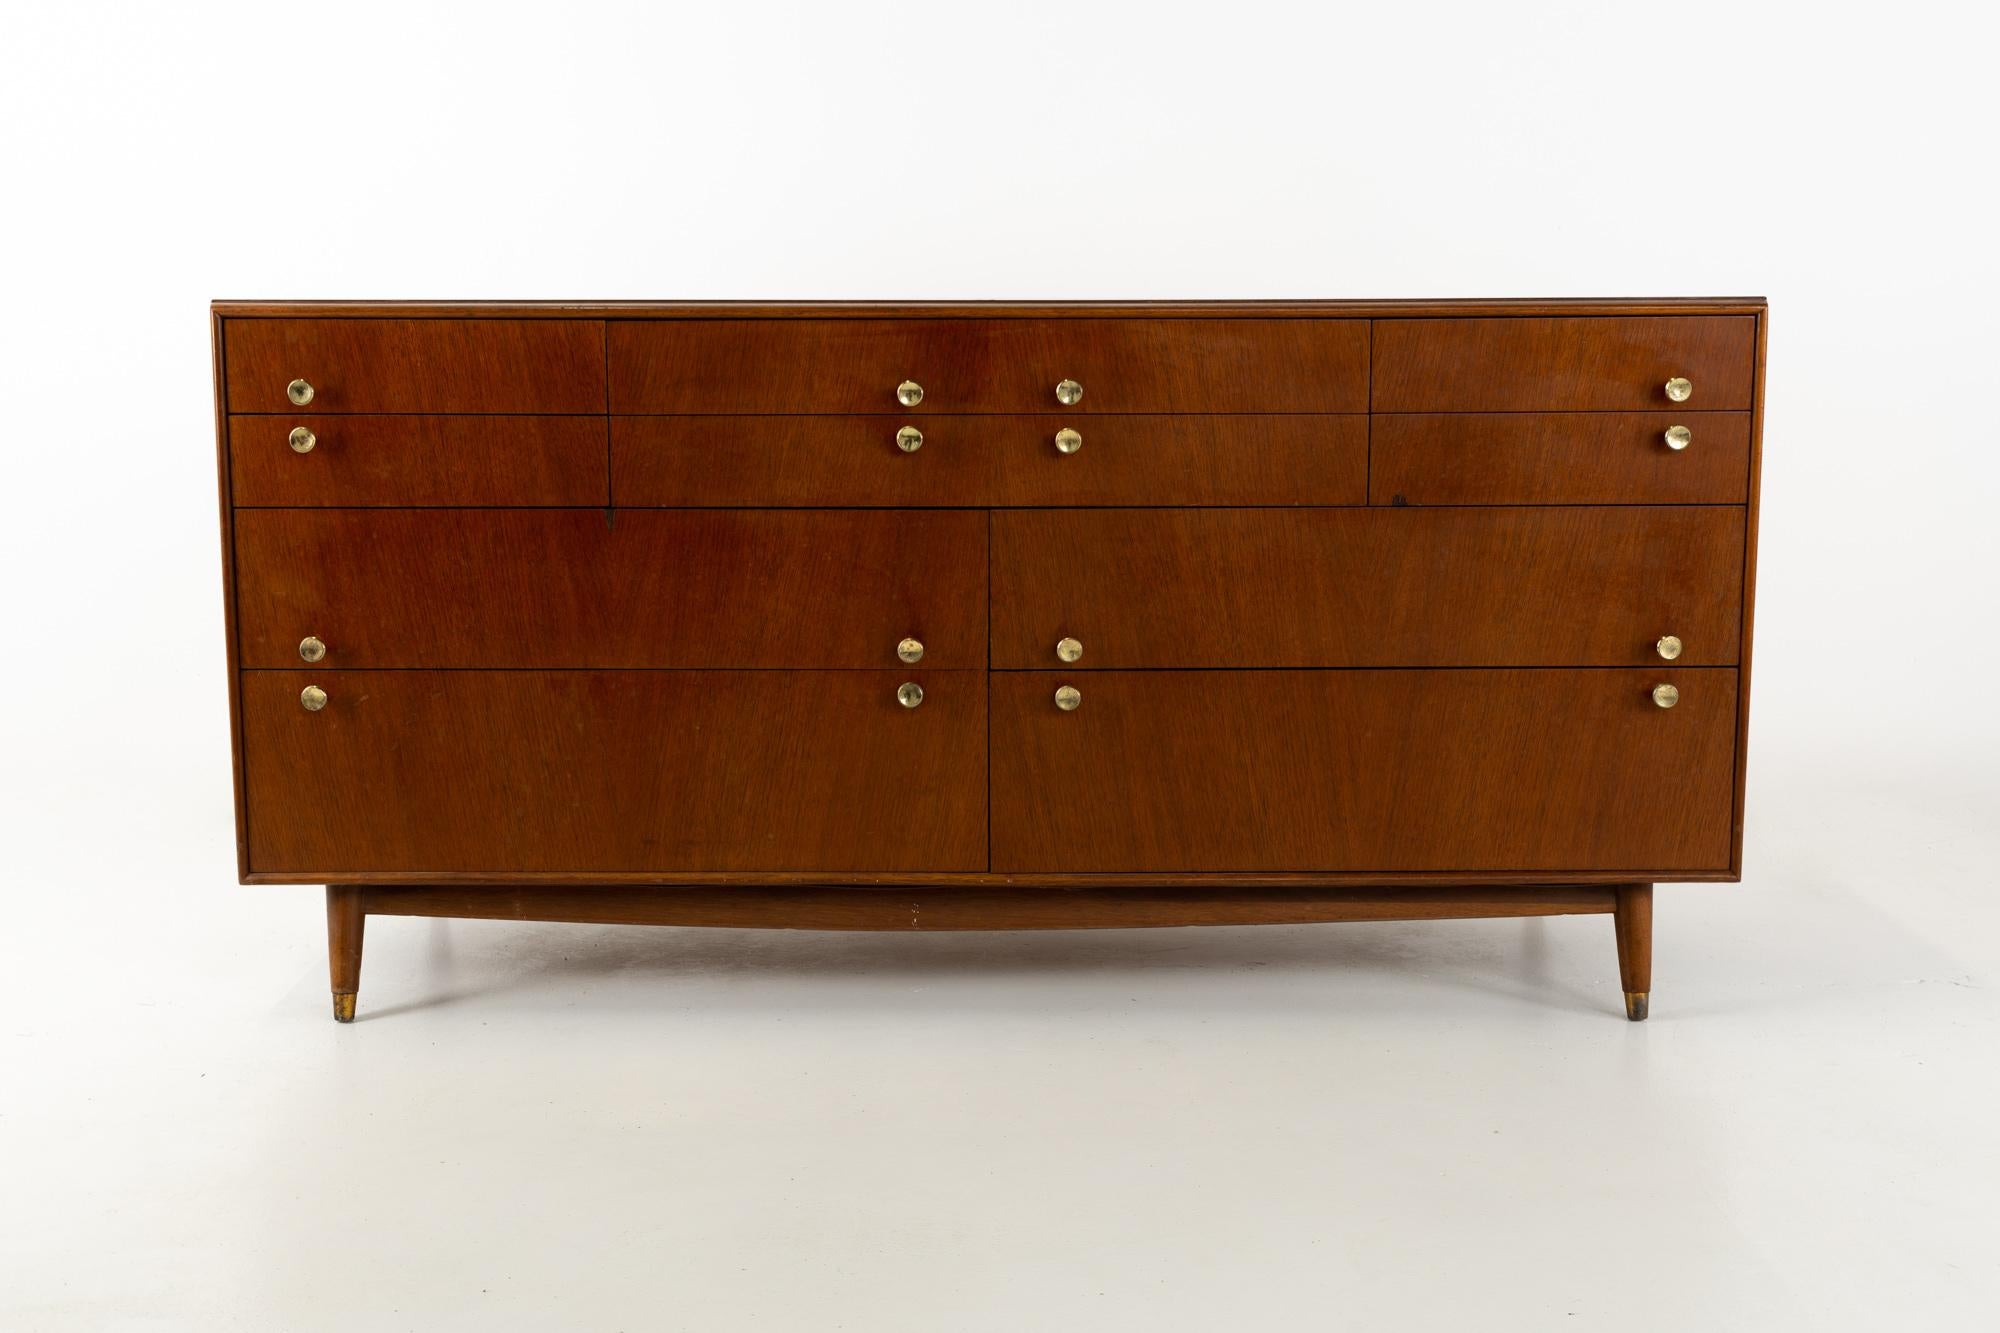 Kroehler Signature Series style Mid Century walnut and brass 8-drawer lowboy dresser
This dresser is 64 wide x 20 deep x 31 inches high

This price includes getting this piece in what we call restored vintage condition. That means the piece is